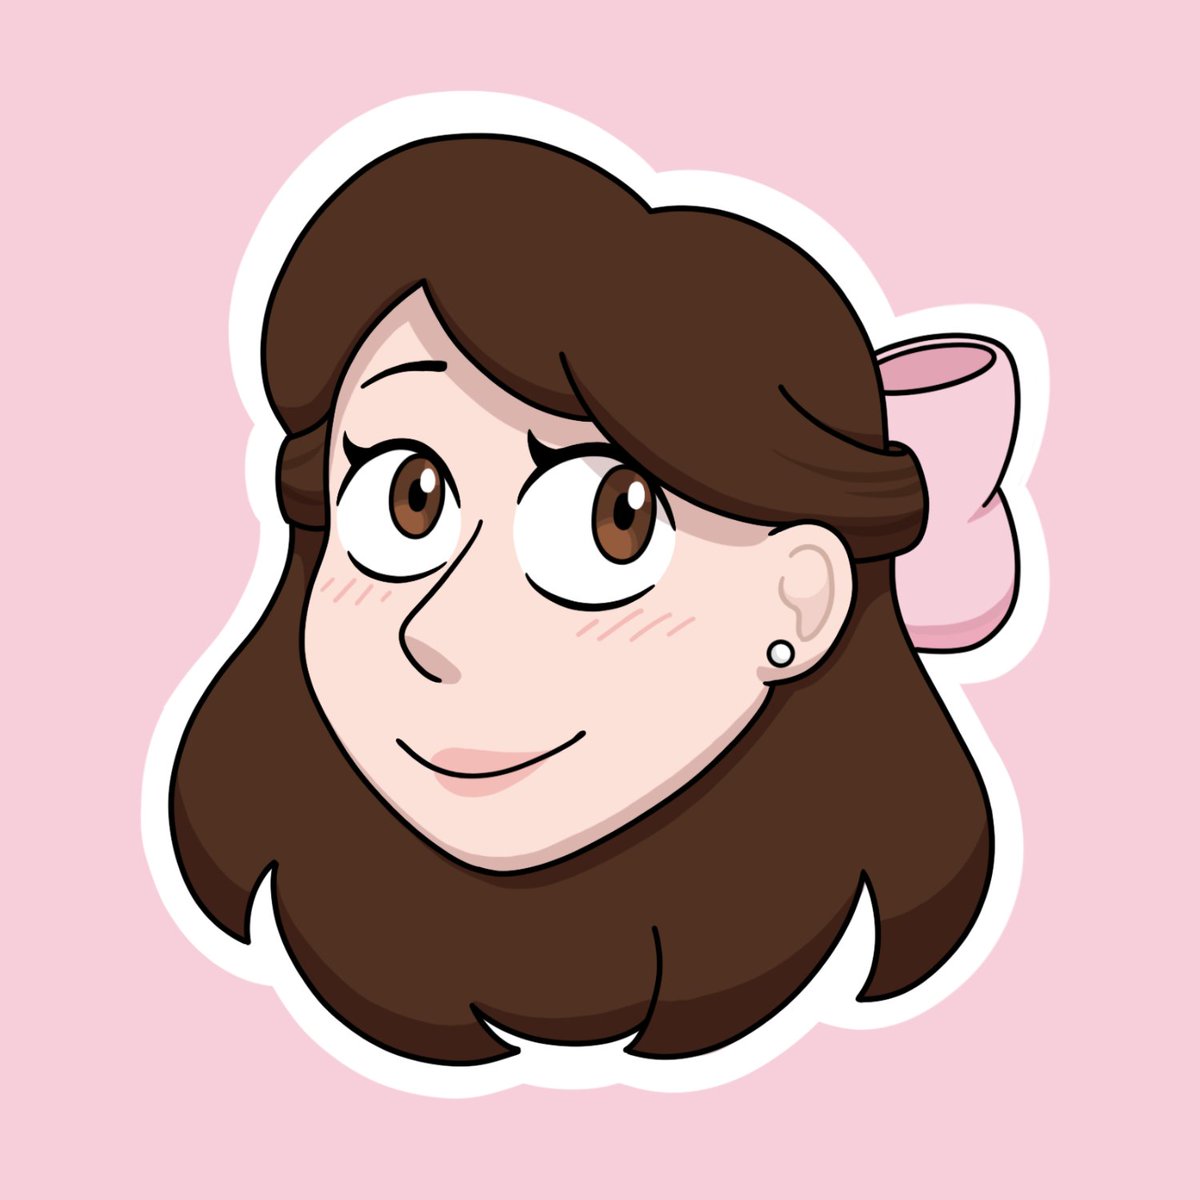 I finally got brave enough to draw my own face as an icon, so it's time for a profile picture that's actually me! Hi everybody 👋 #newpfp #digitalart #pink